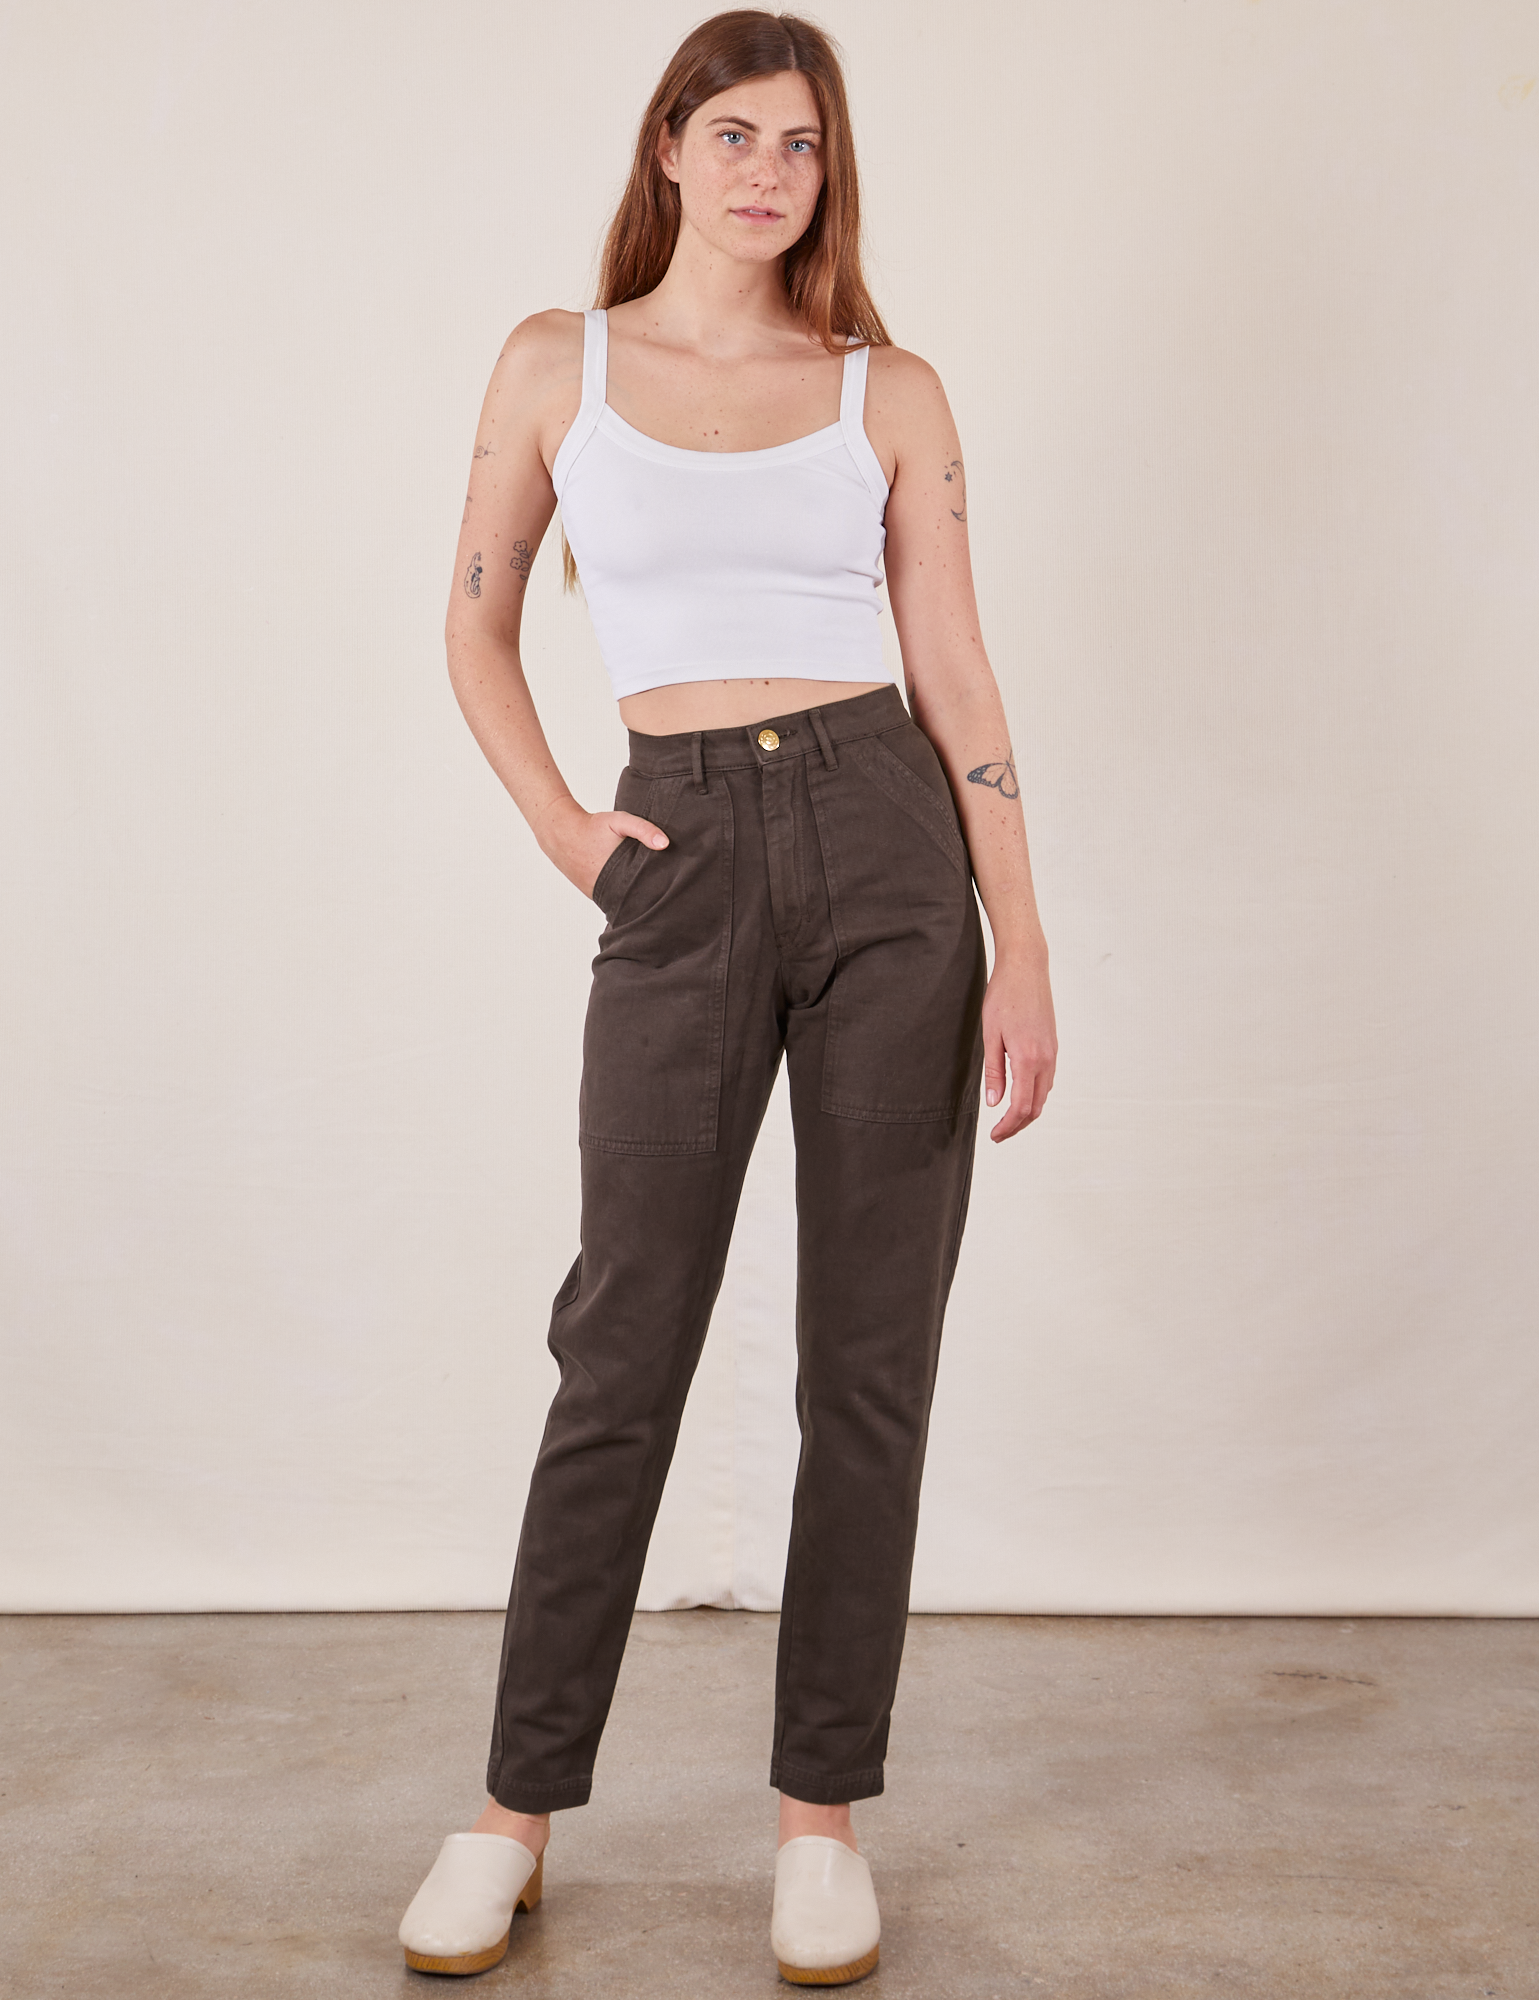 Scarlett is 5&#39;9&quot; and wearing XS Pencil Pants in Espresso Brown paired with vintage off-white Cami